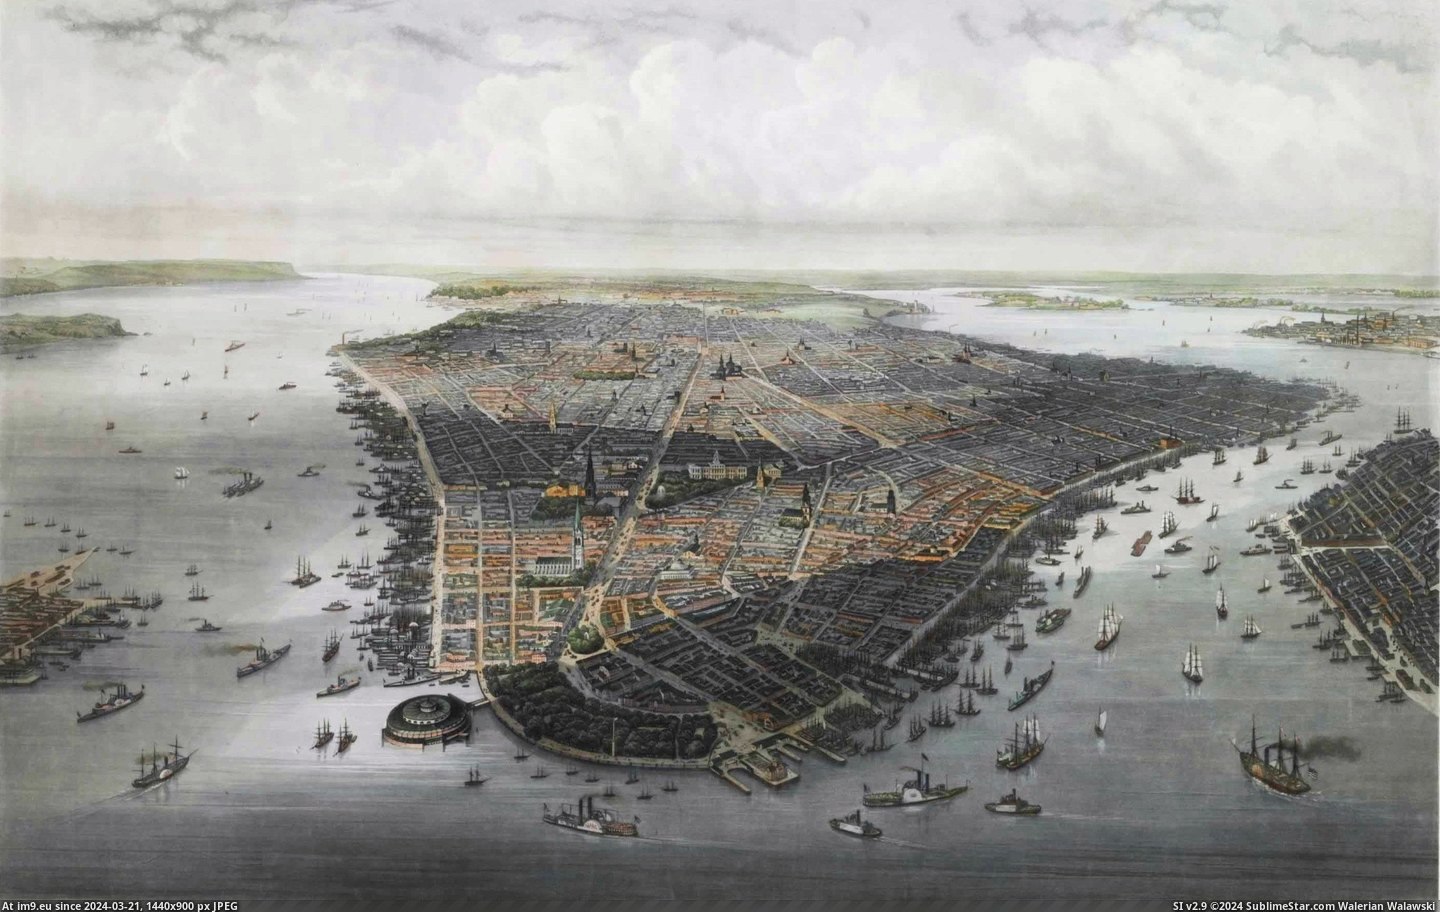 #Park #City #Bird #Foreground #Battery #Eye #York [Mapporn] Bird's-eye view of New York City with Battery Park in the foreground. Goupil & Co., 1851. [2786x1753] Pic. (Image of album My r/MAPS favs))